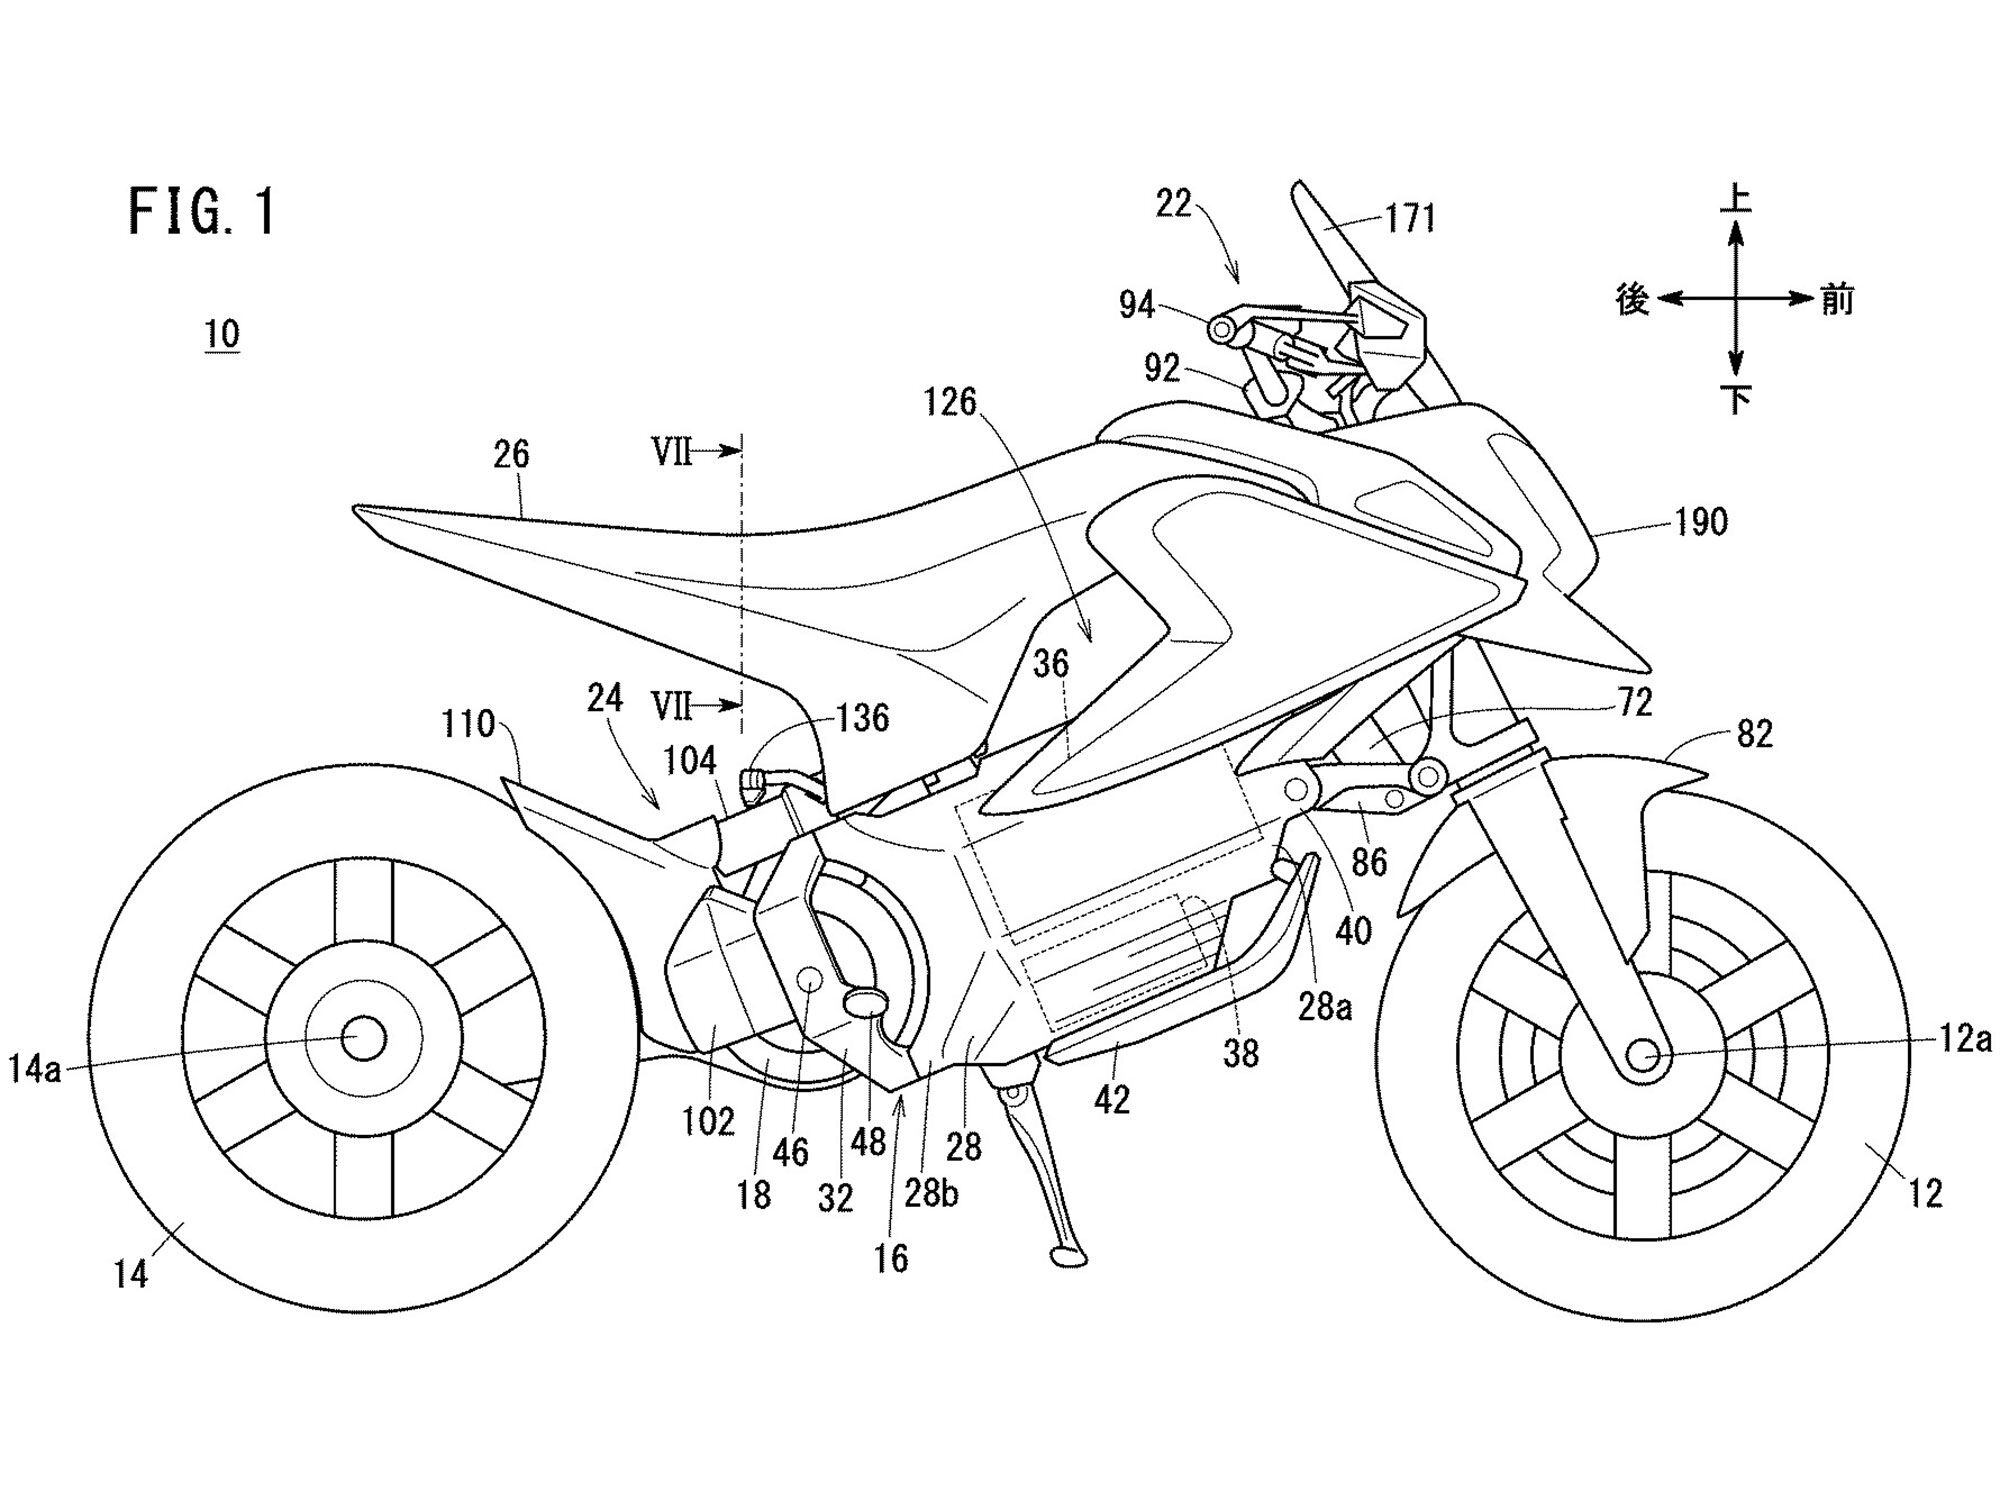 Will we see an electric Honda fun bike in 2022? If so, it could look something like this concept seen in recent patents.